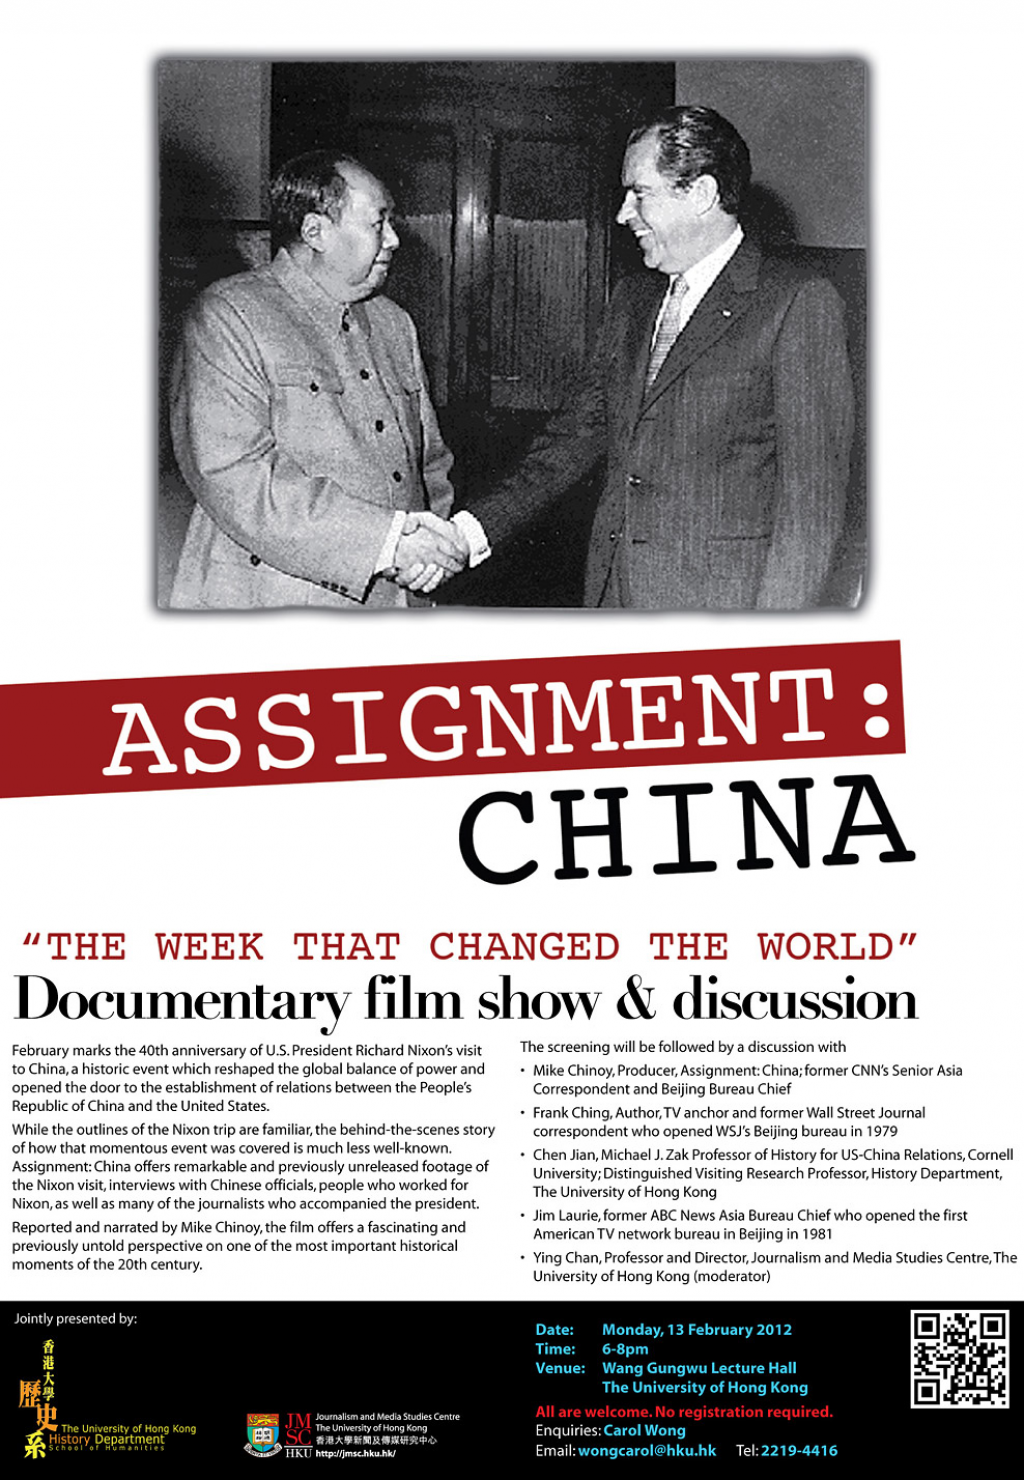 Assignment: China “The Week that Changed the World